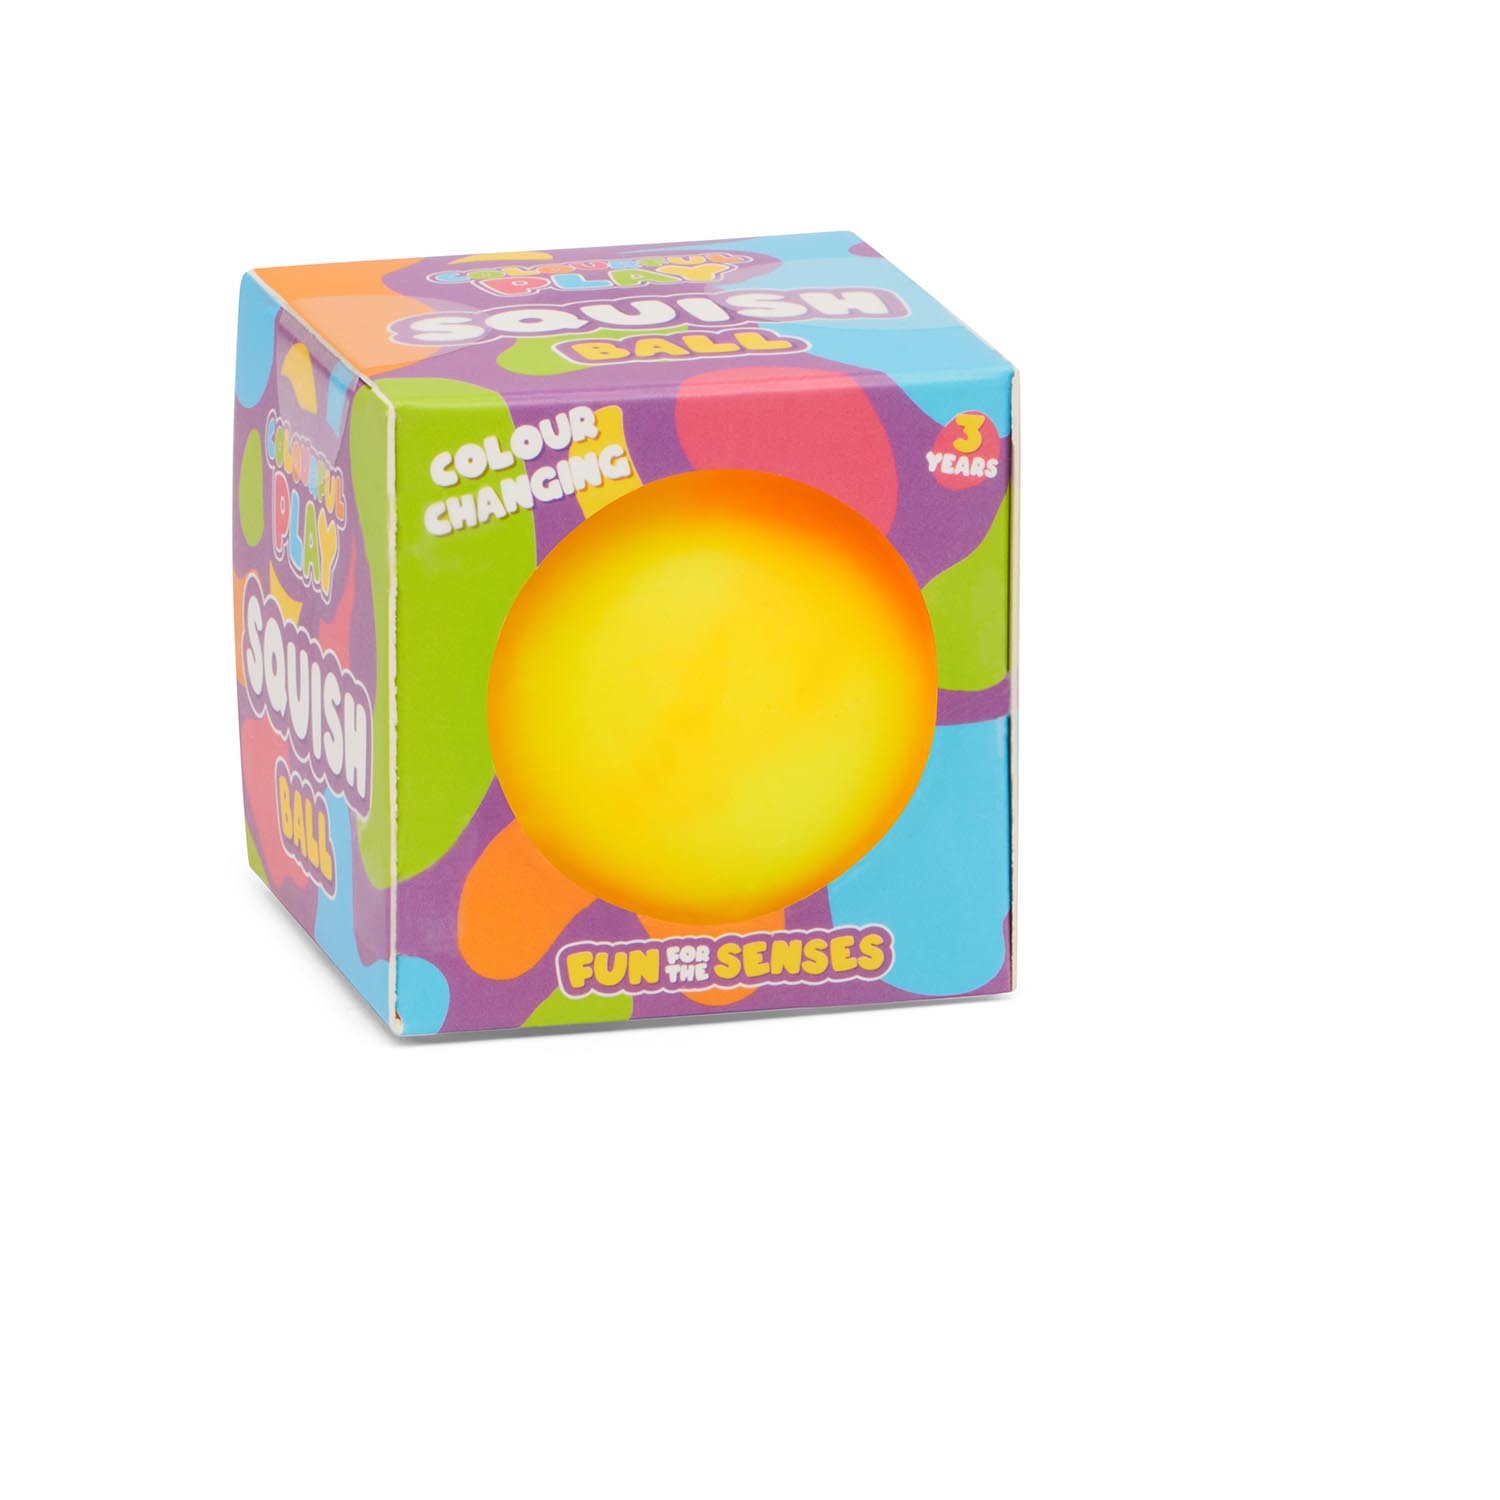 Single ToyMania Colour Changing Sensory Squish Ball in Assorted styles Image 8